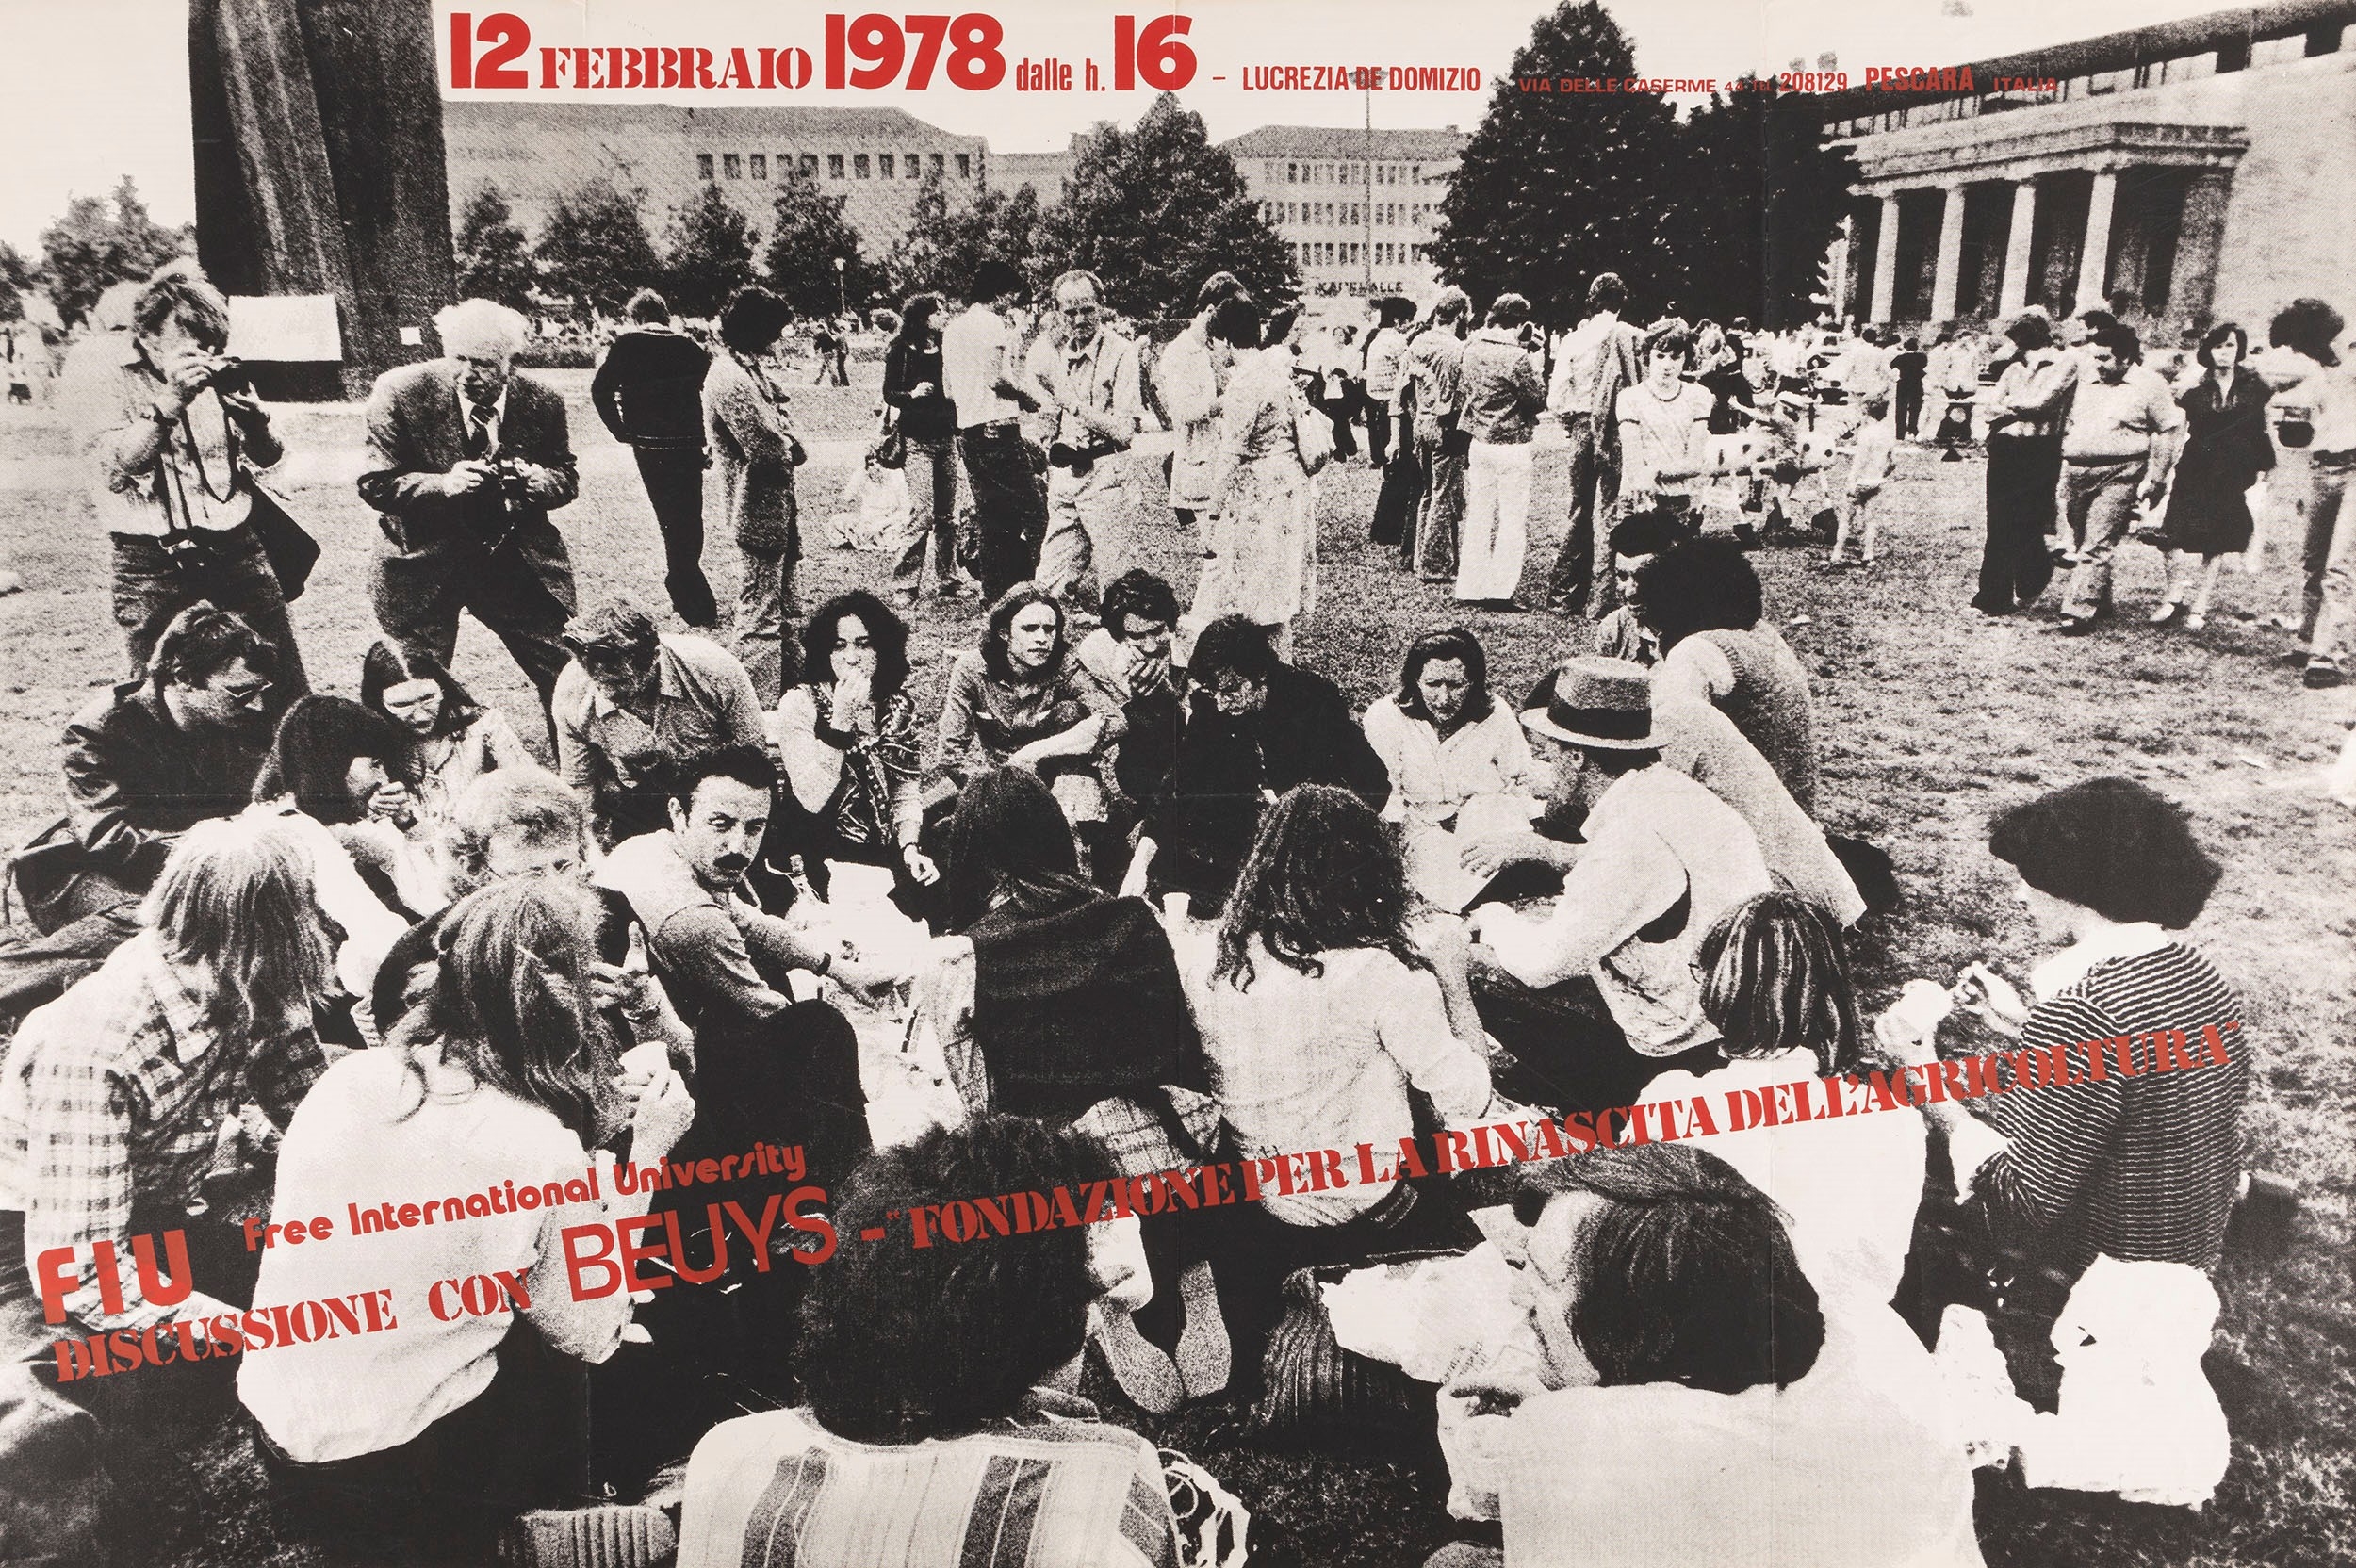 Free International University. Discussione con Beuys by Joseph Beuys, 1978